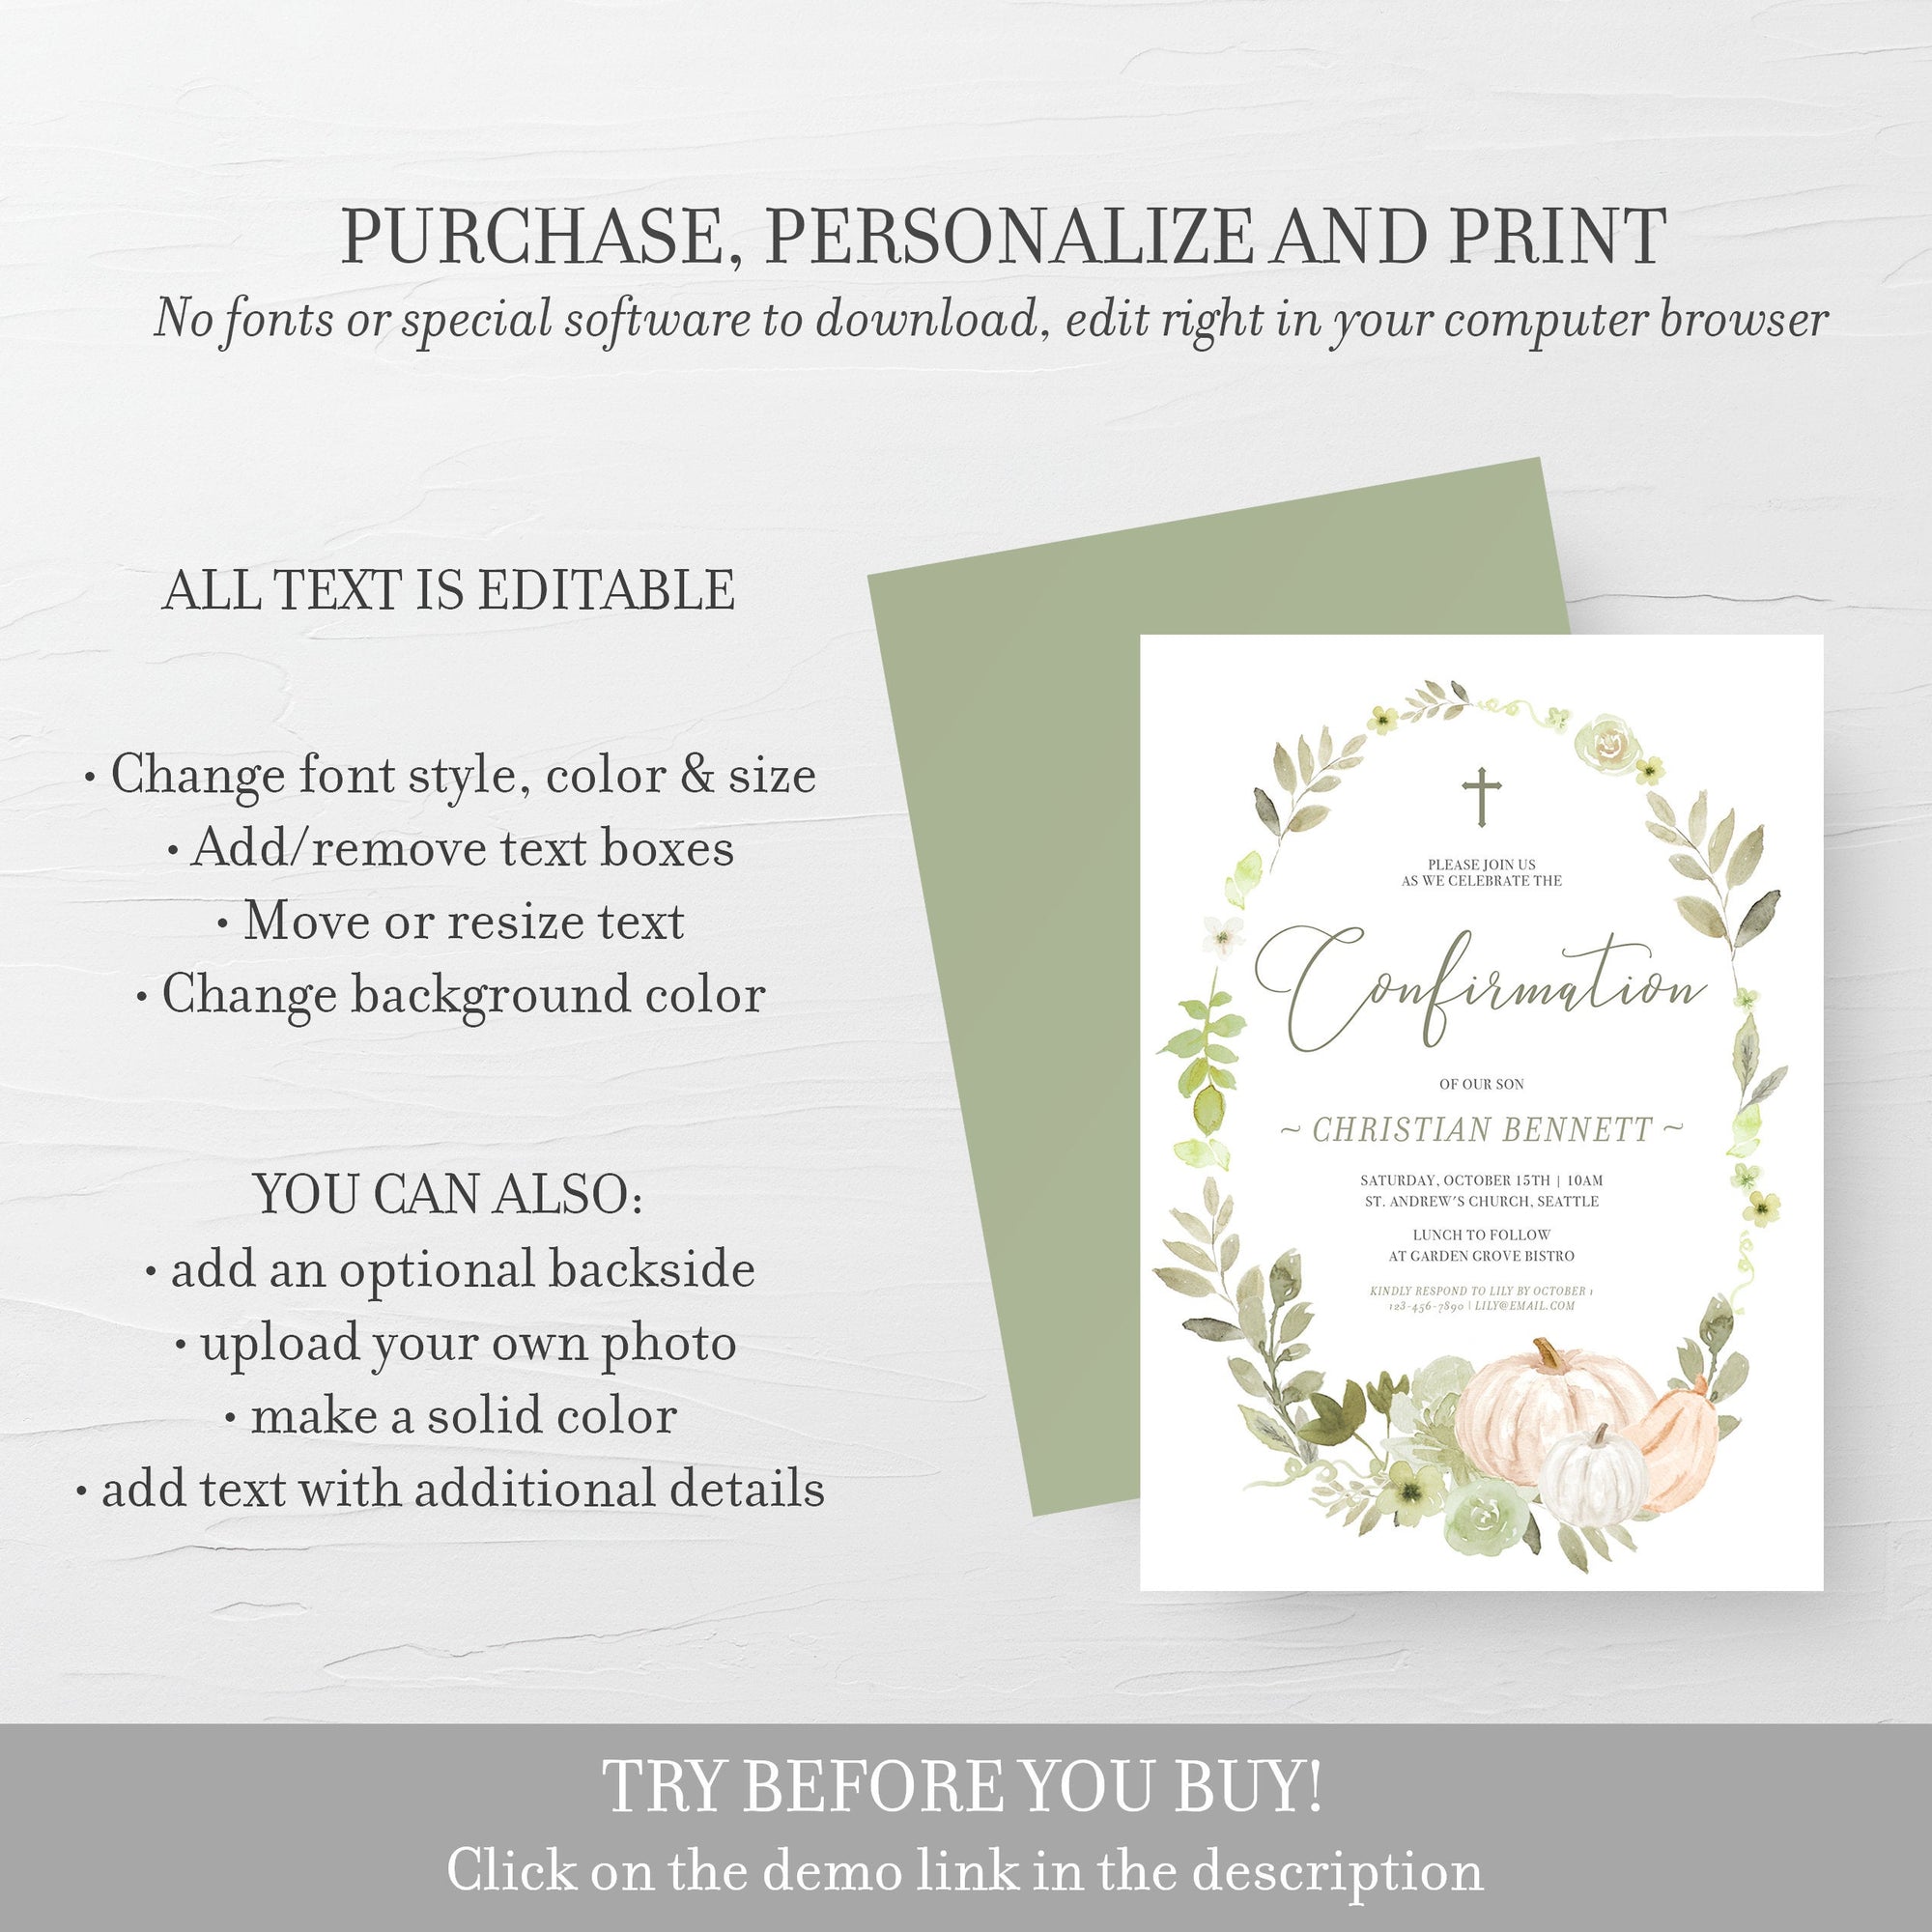 Confirmation Invitation Template, Fall Confirmation Invite, Pumpkin Greenery Confirmation Invitation Printable, 5x7 INSTANT DOWNLOAD PG100